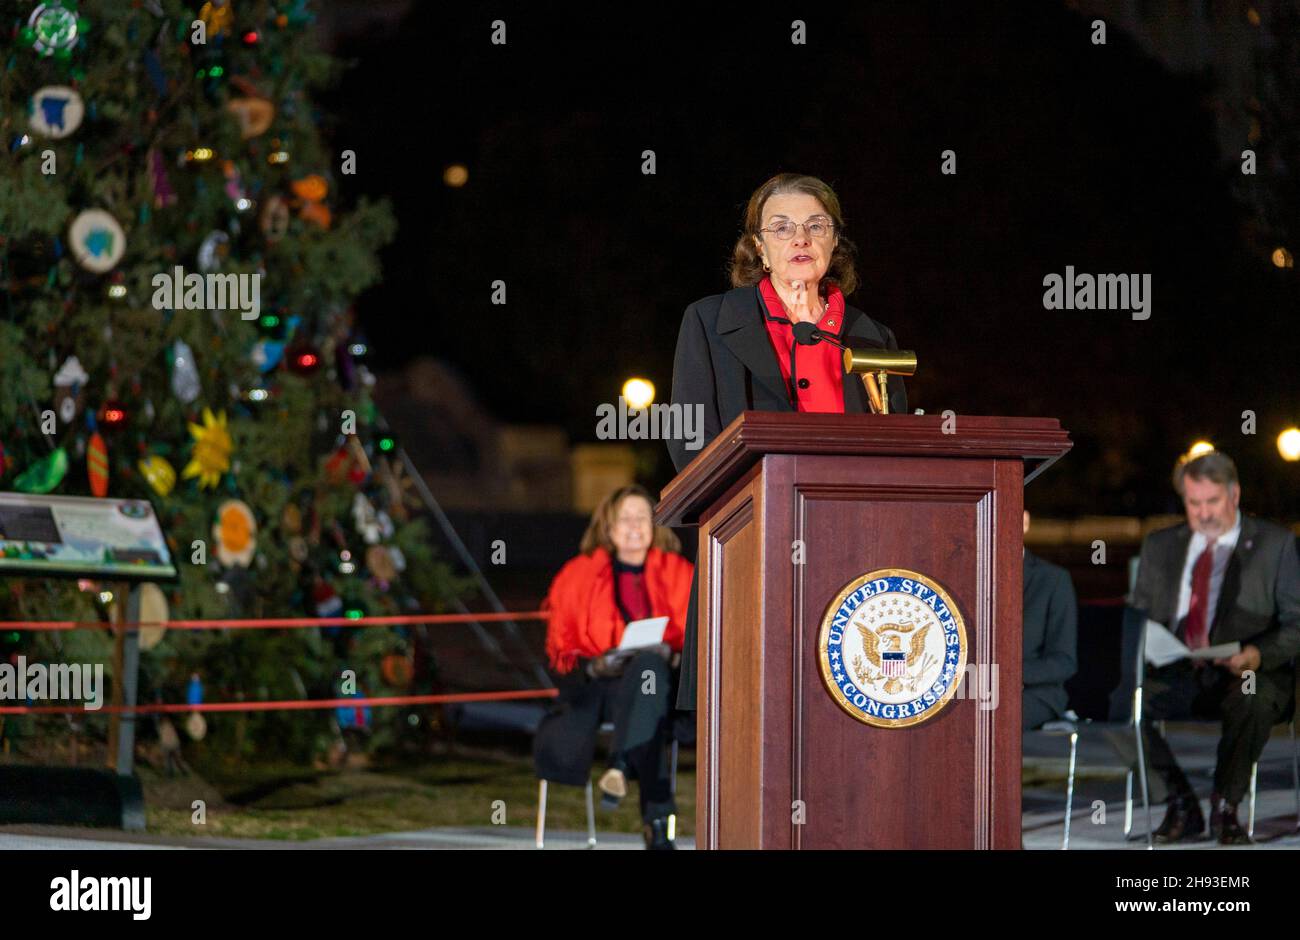 Washington, United States of America. 01 December, 2021. U.S. Senator Dianne Feinstein delivers remarks during the annual Capitol Christmas Tree Lighting ceremony on the west lawn of the U.S. Capitol December 1, 2021 in Washington, DC. The tree is an 84-foot tall White Fir from the Six Rivers National Forest in California.   Credit: Tanya E Flores/USFS/Alamy Live News Stock Photo